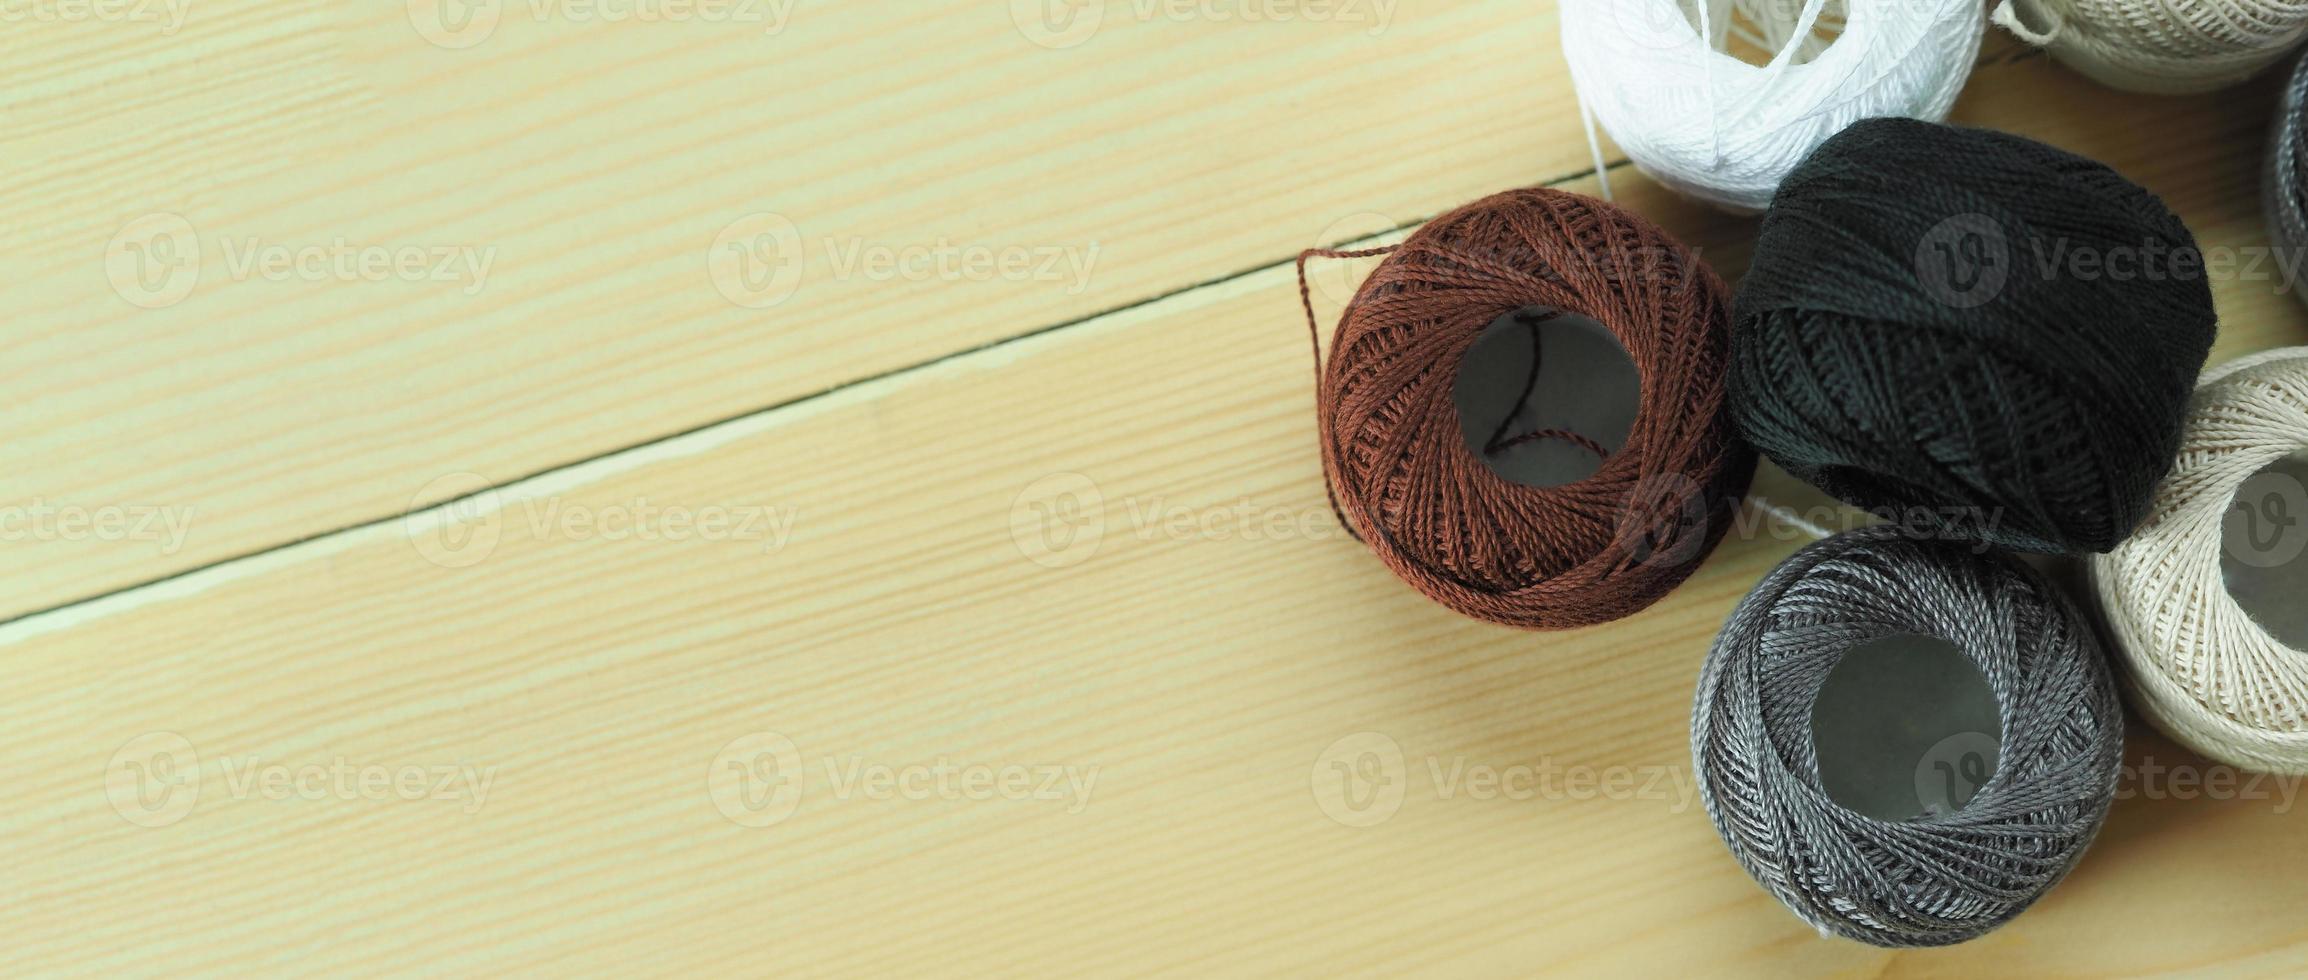 Handicraft work by thread, needle and sew knit photo